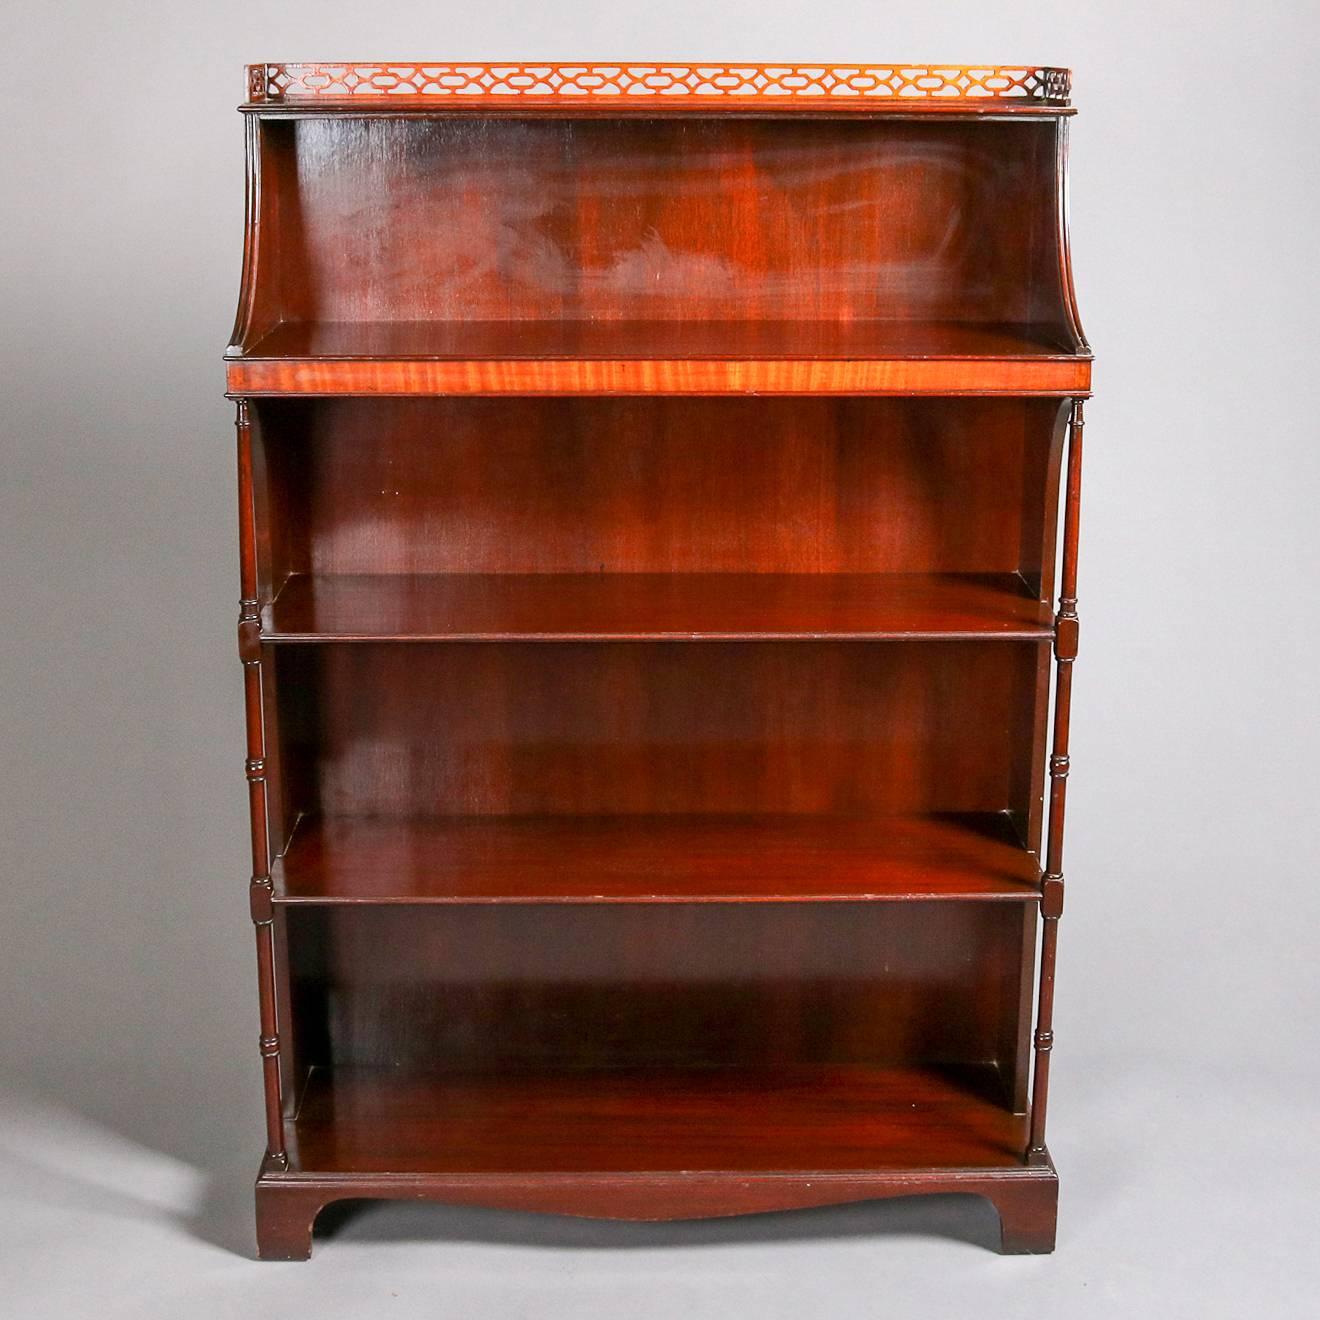 Antique federal style bookshelf by Charak Furniture Co. features mahogany construction with pieced gallery above four open shelves, flanked by semi-open sides with column supports, original Charak Furniture Co., Boston Mass. label on back, 19th